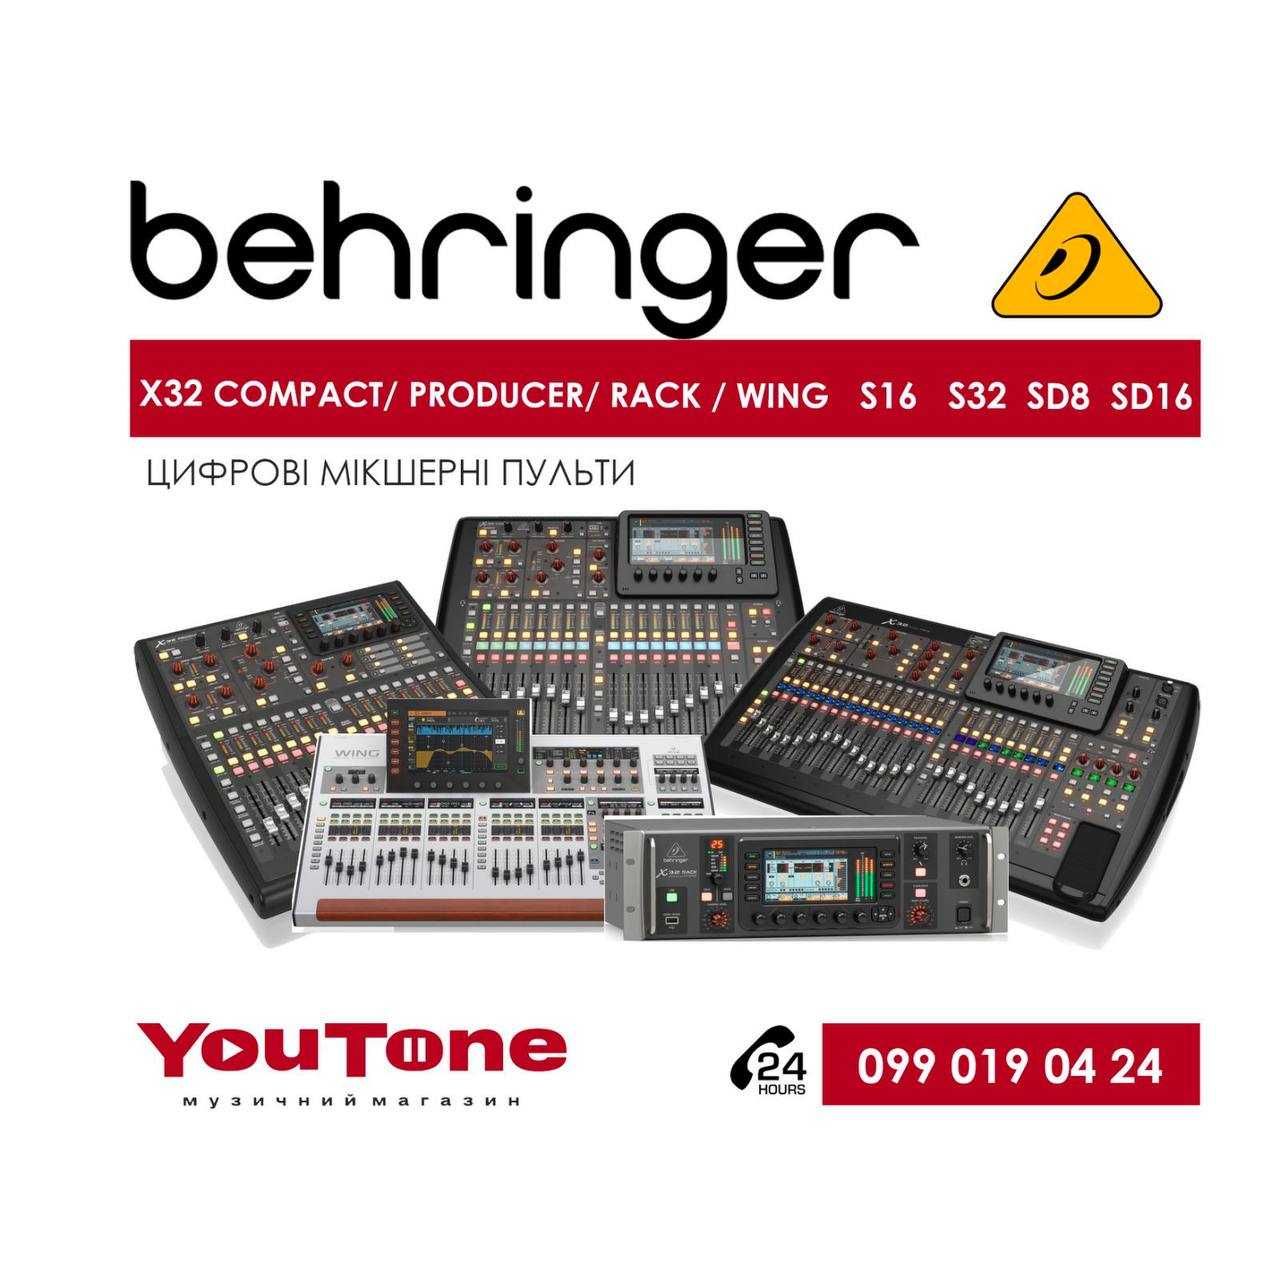 Behringer X32 COMPACT, PRODUCER, RACK, WING, S16, S32, SD8, SD16